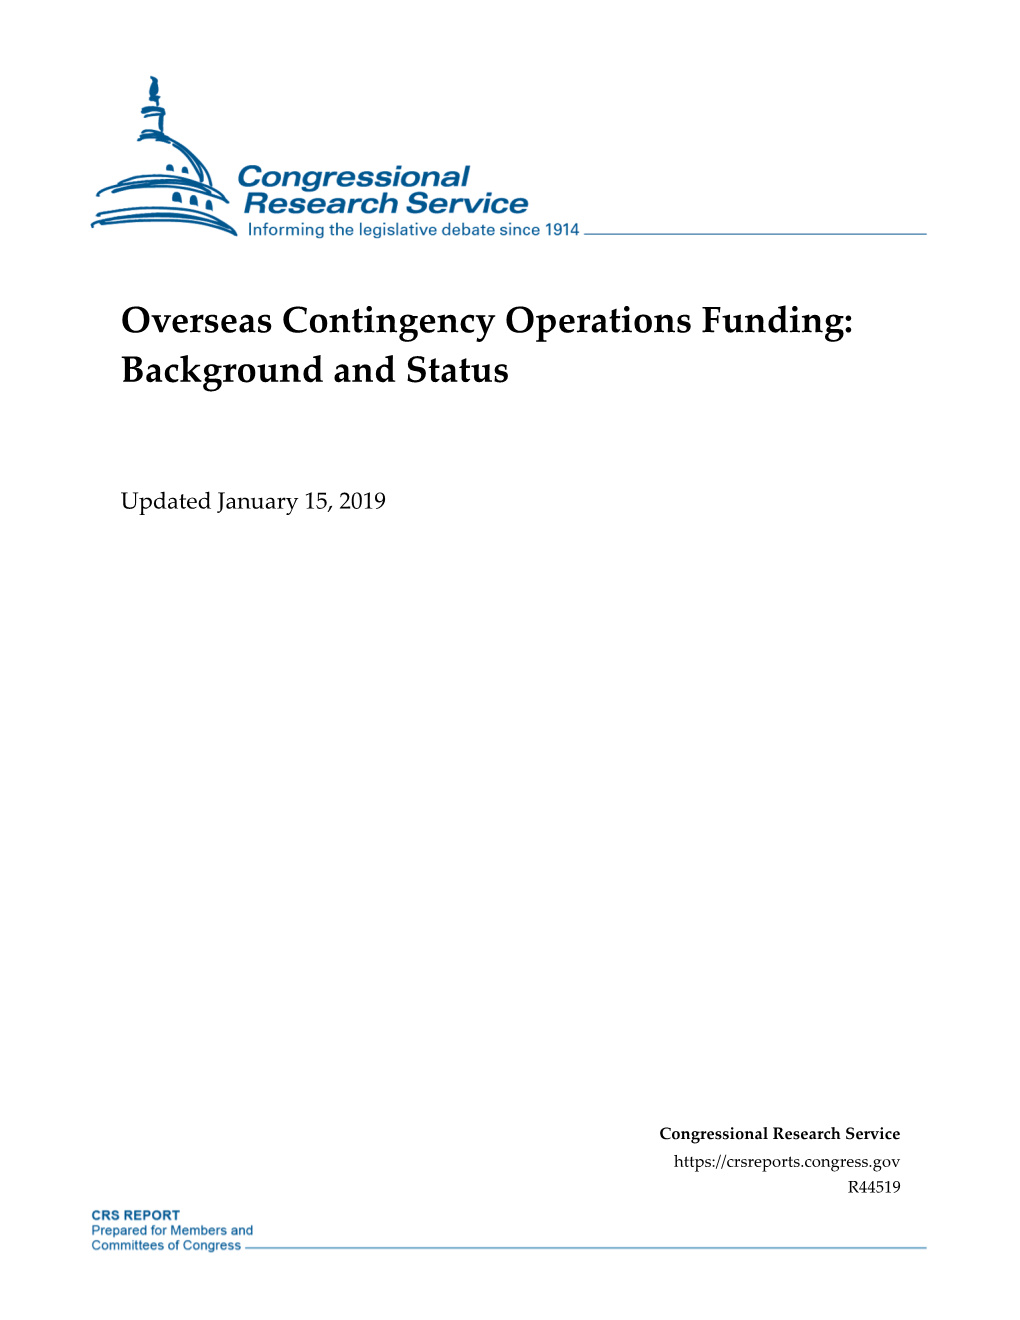 Overseas Contingency Operations Funding: Background and Status